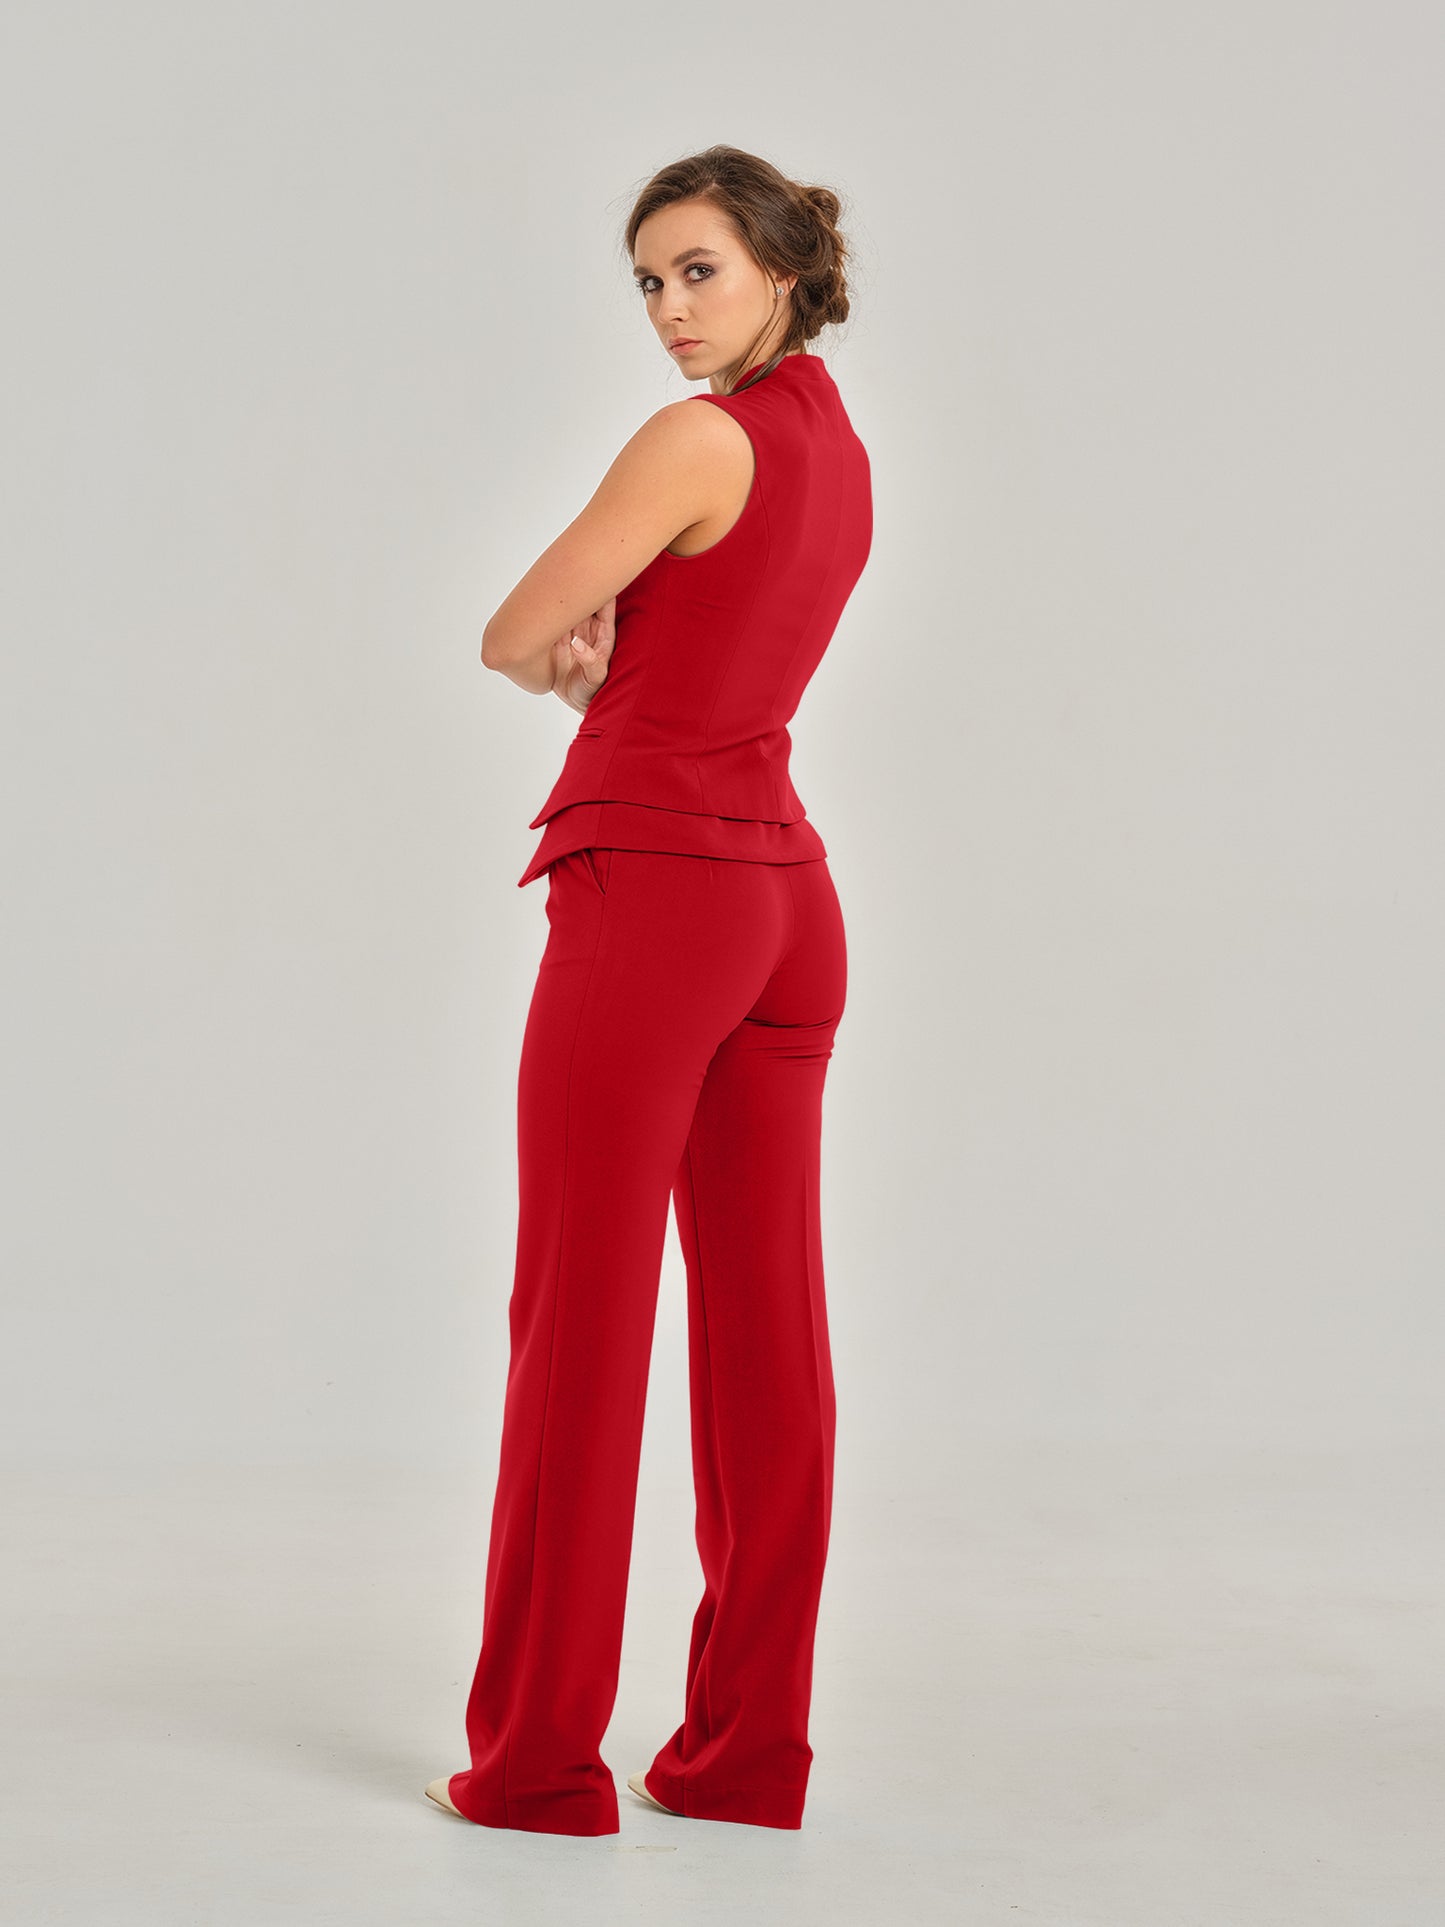 Fierce Red Fitted Single-Breasted Waistcoat